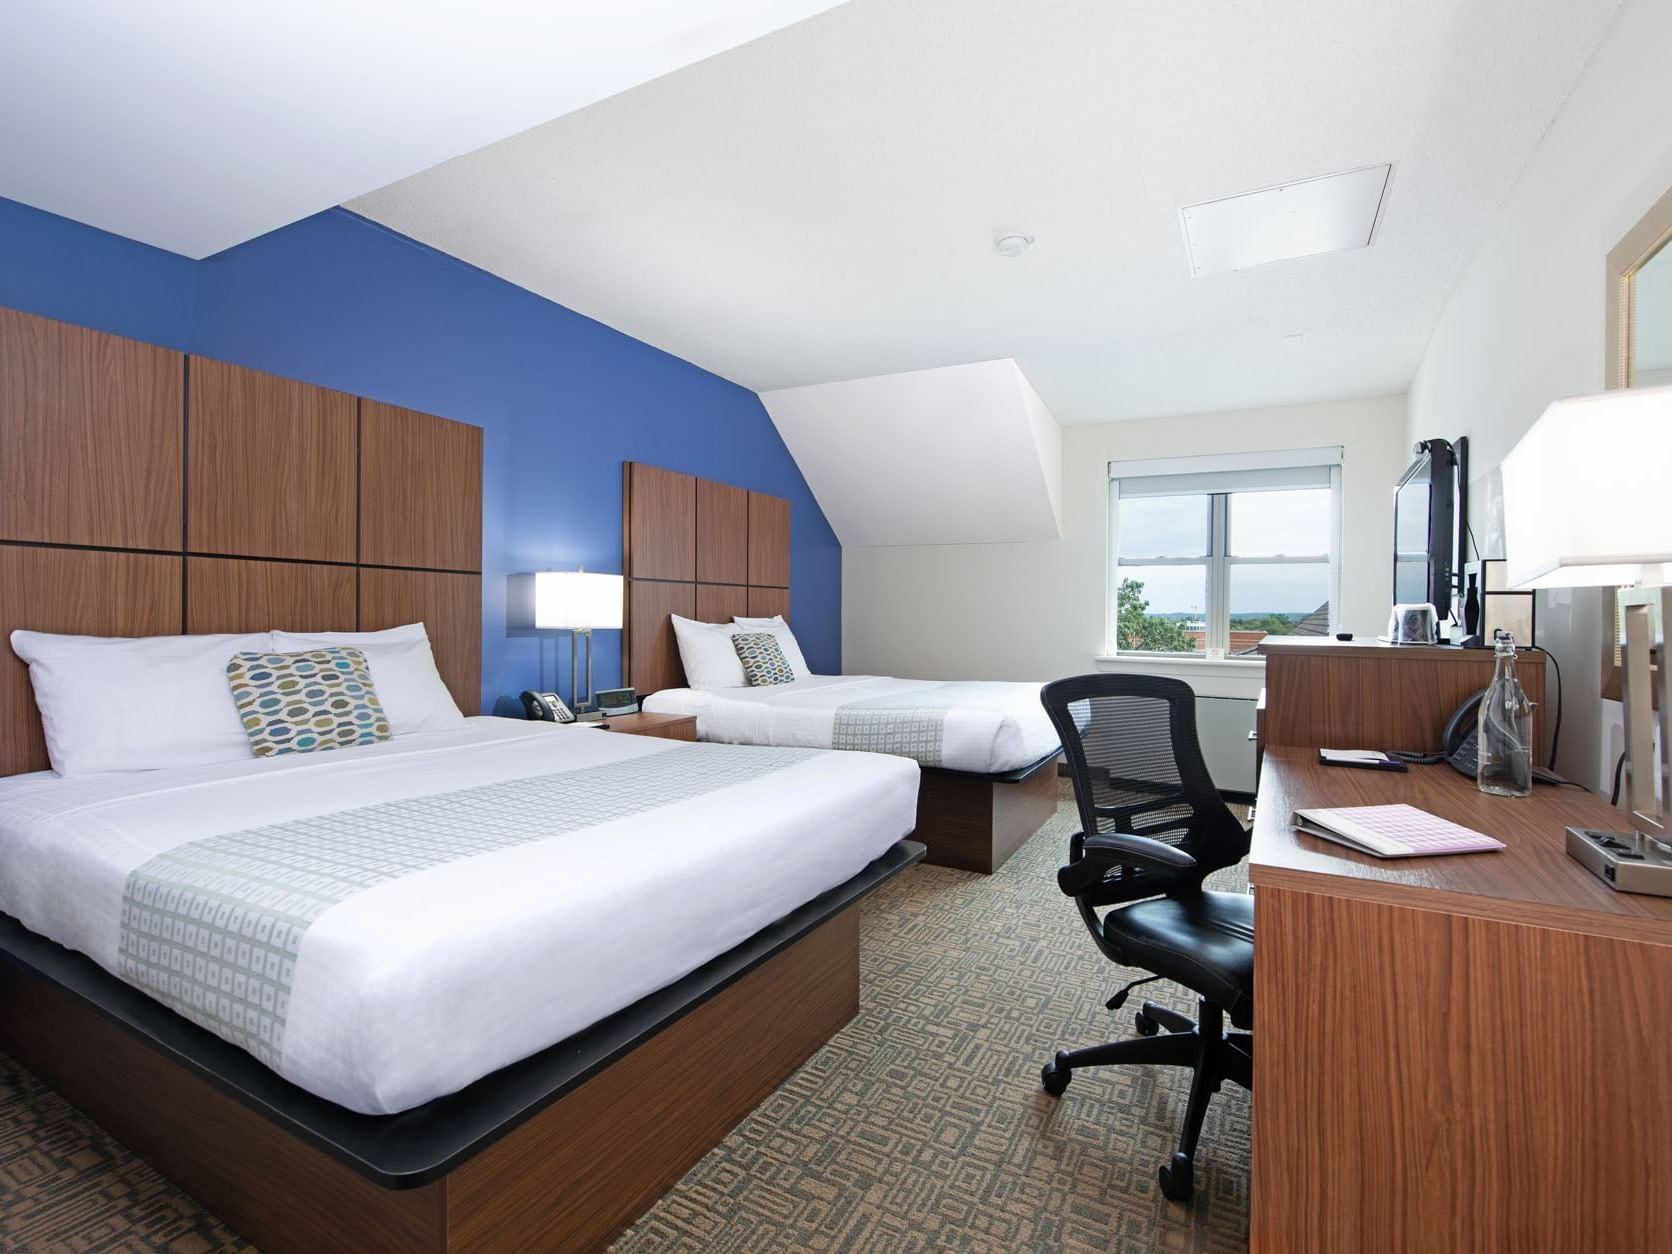 Standard Double Queen bedroom at Kellogg Conference Center